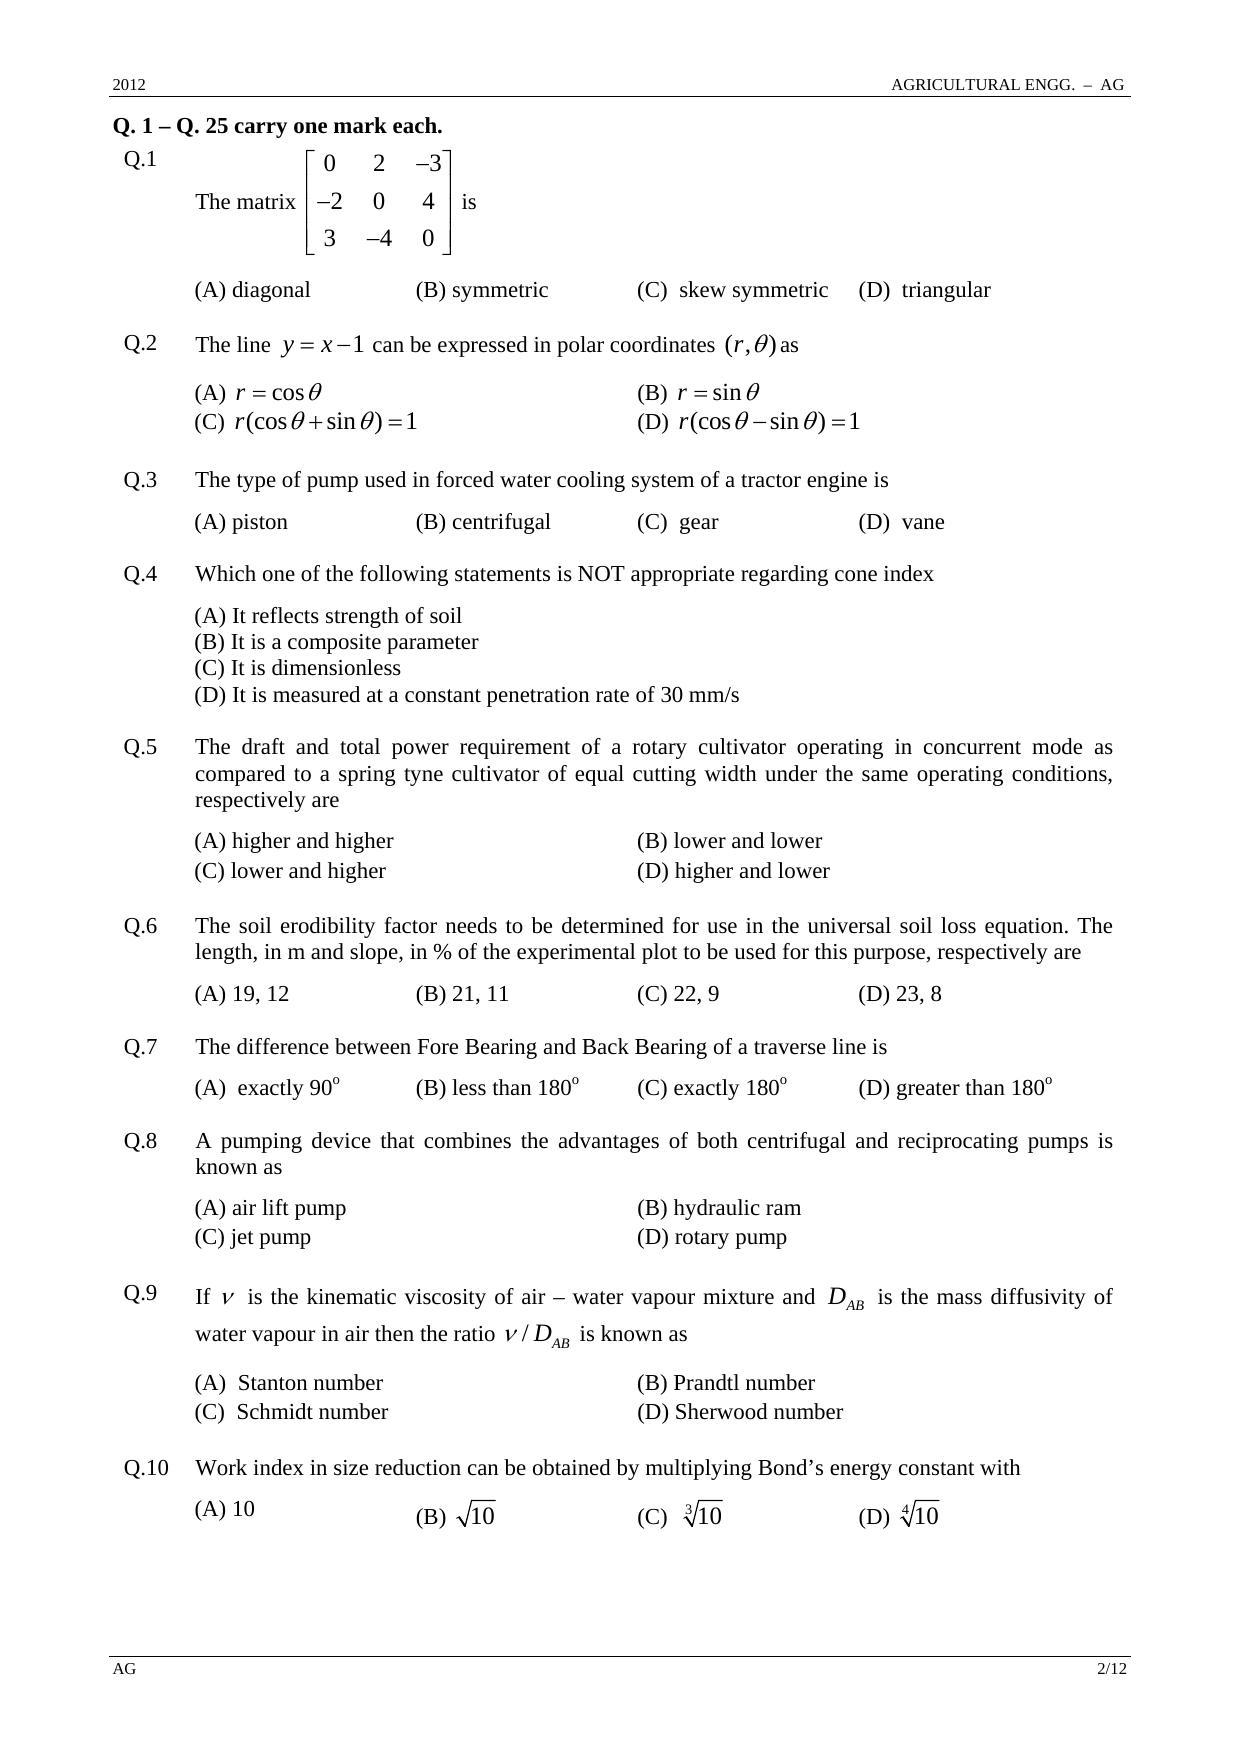 GATE 2012 Agricultural Engineering (AG) Question Paper with Answer Key - Page 2